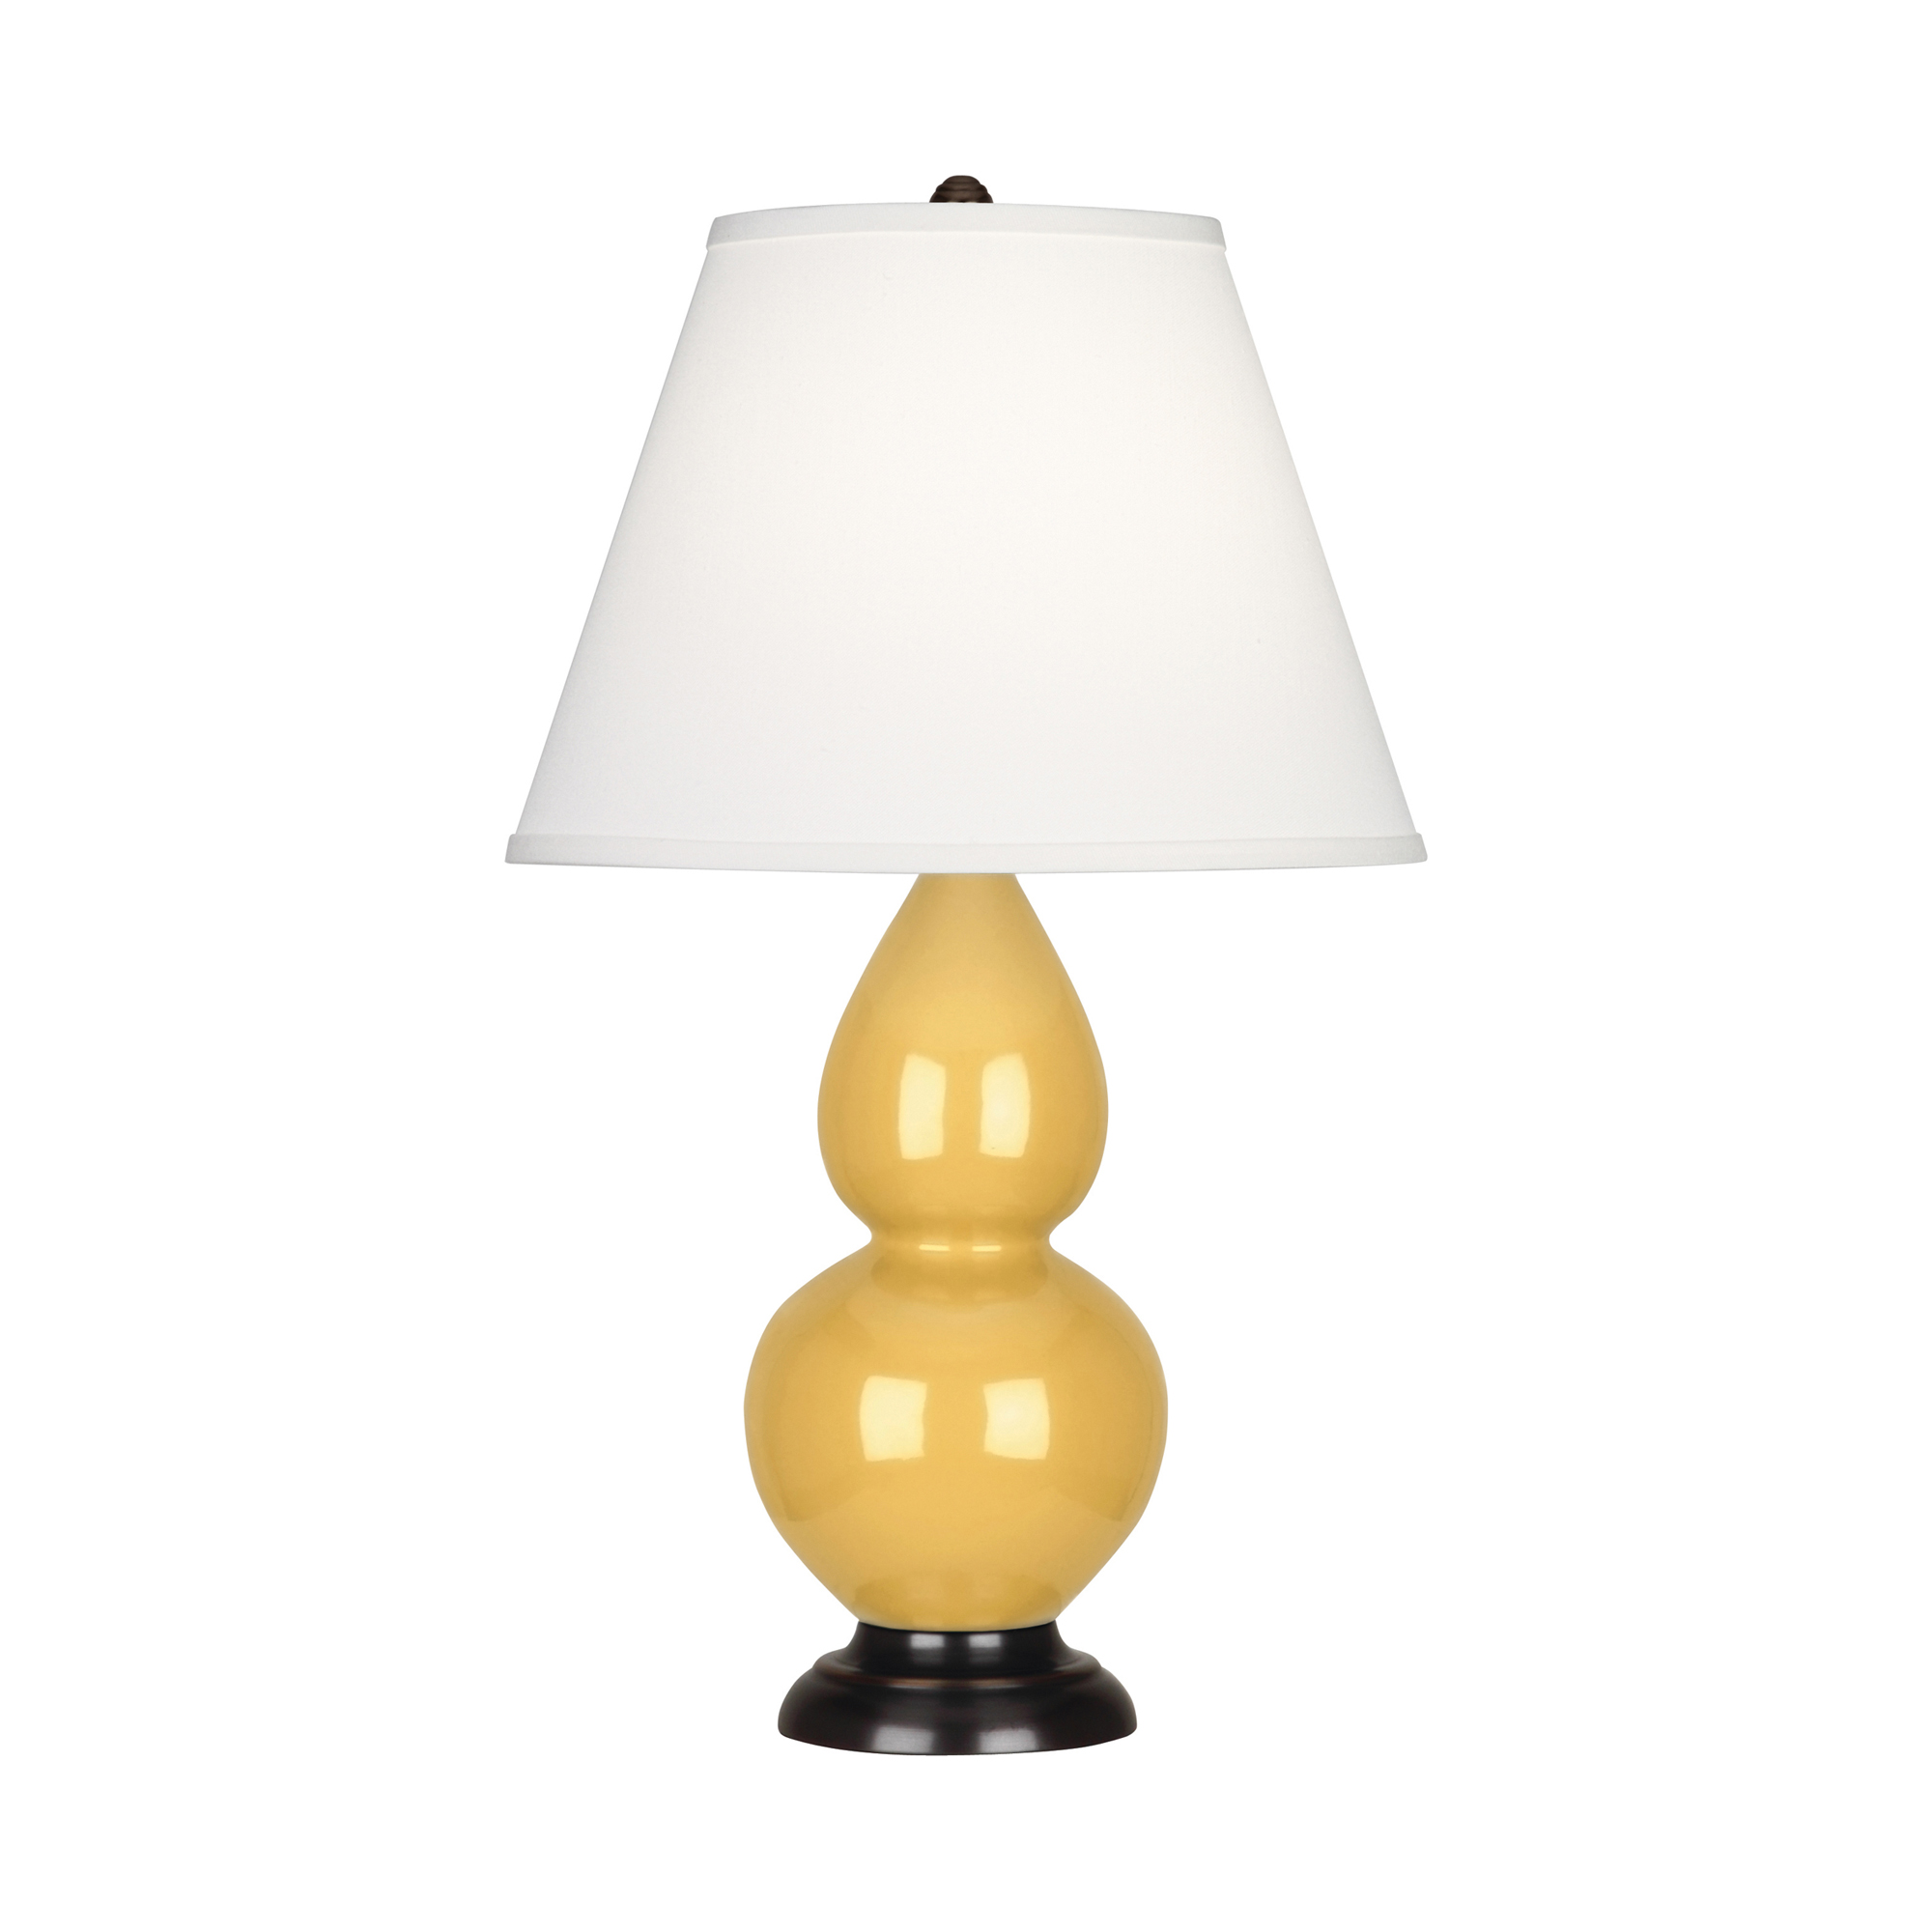 Small Double Gourd Accent Lamp Style #SU11X